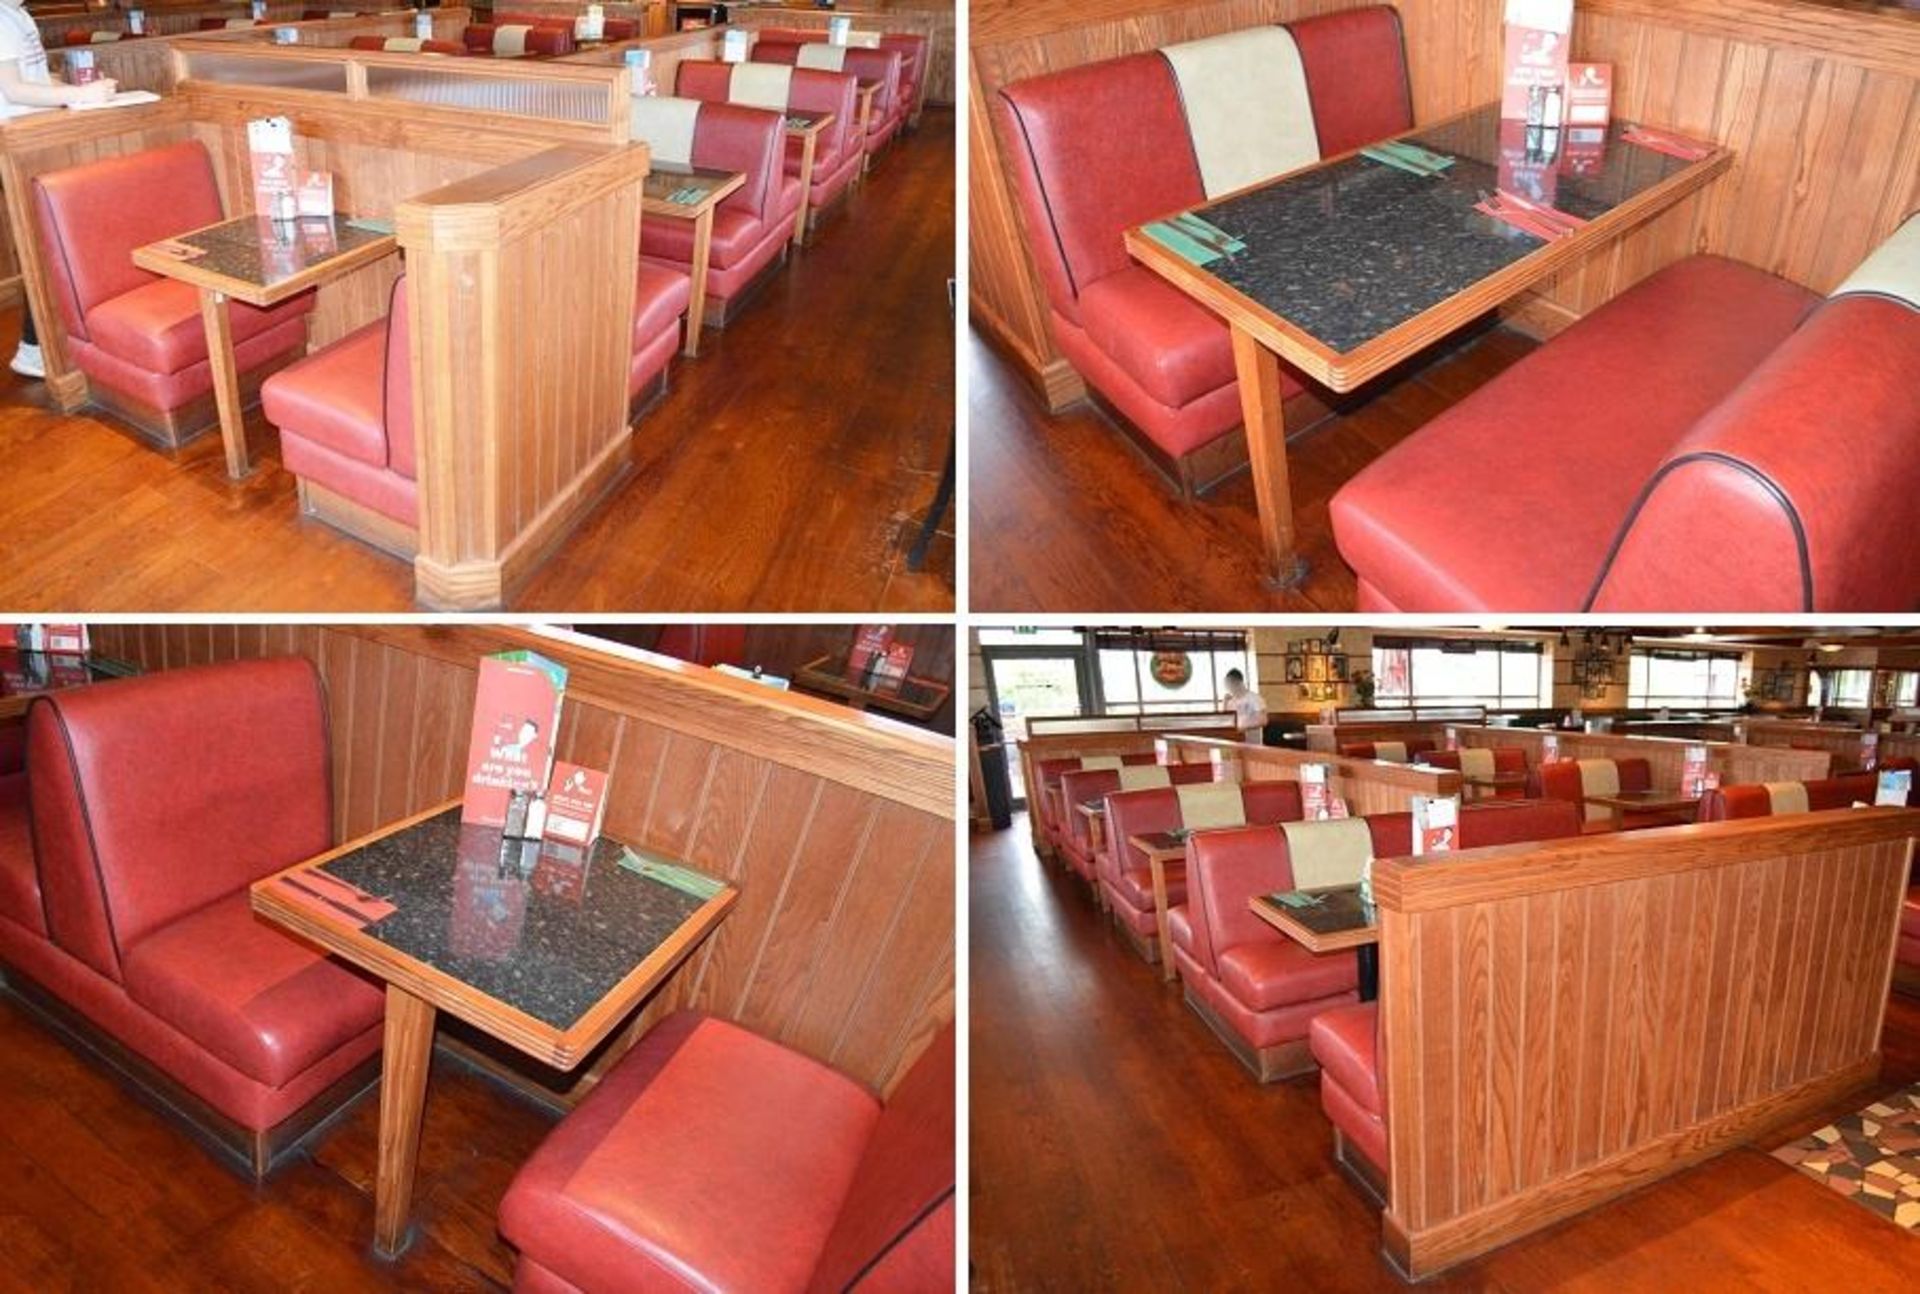 1 x Selection of Cosy Bespoke Seating Booths in a 1950's Retro American Diner Design With Dining Tab